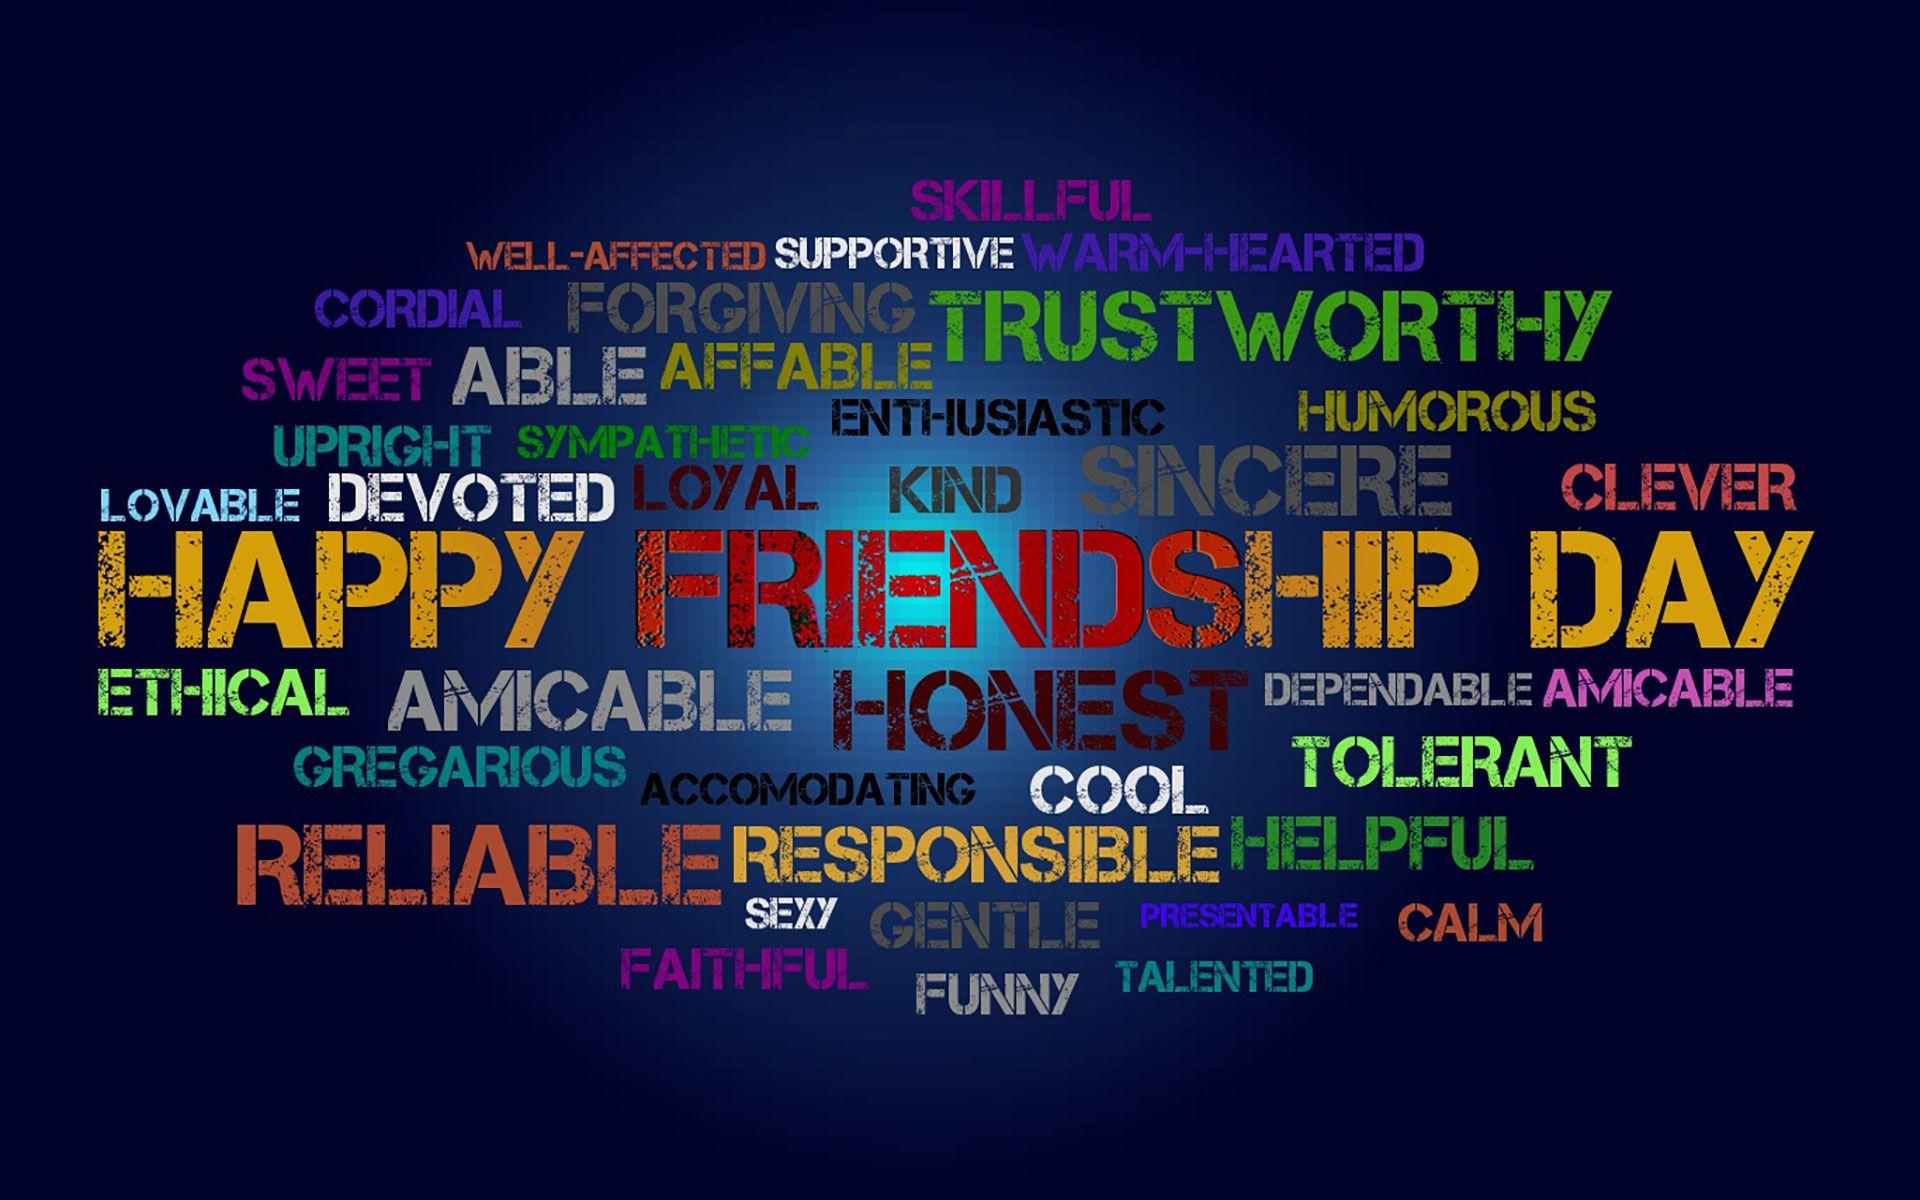 Free download HD Friendship Day Image with Quotes. These Cute Happy